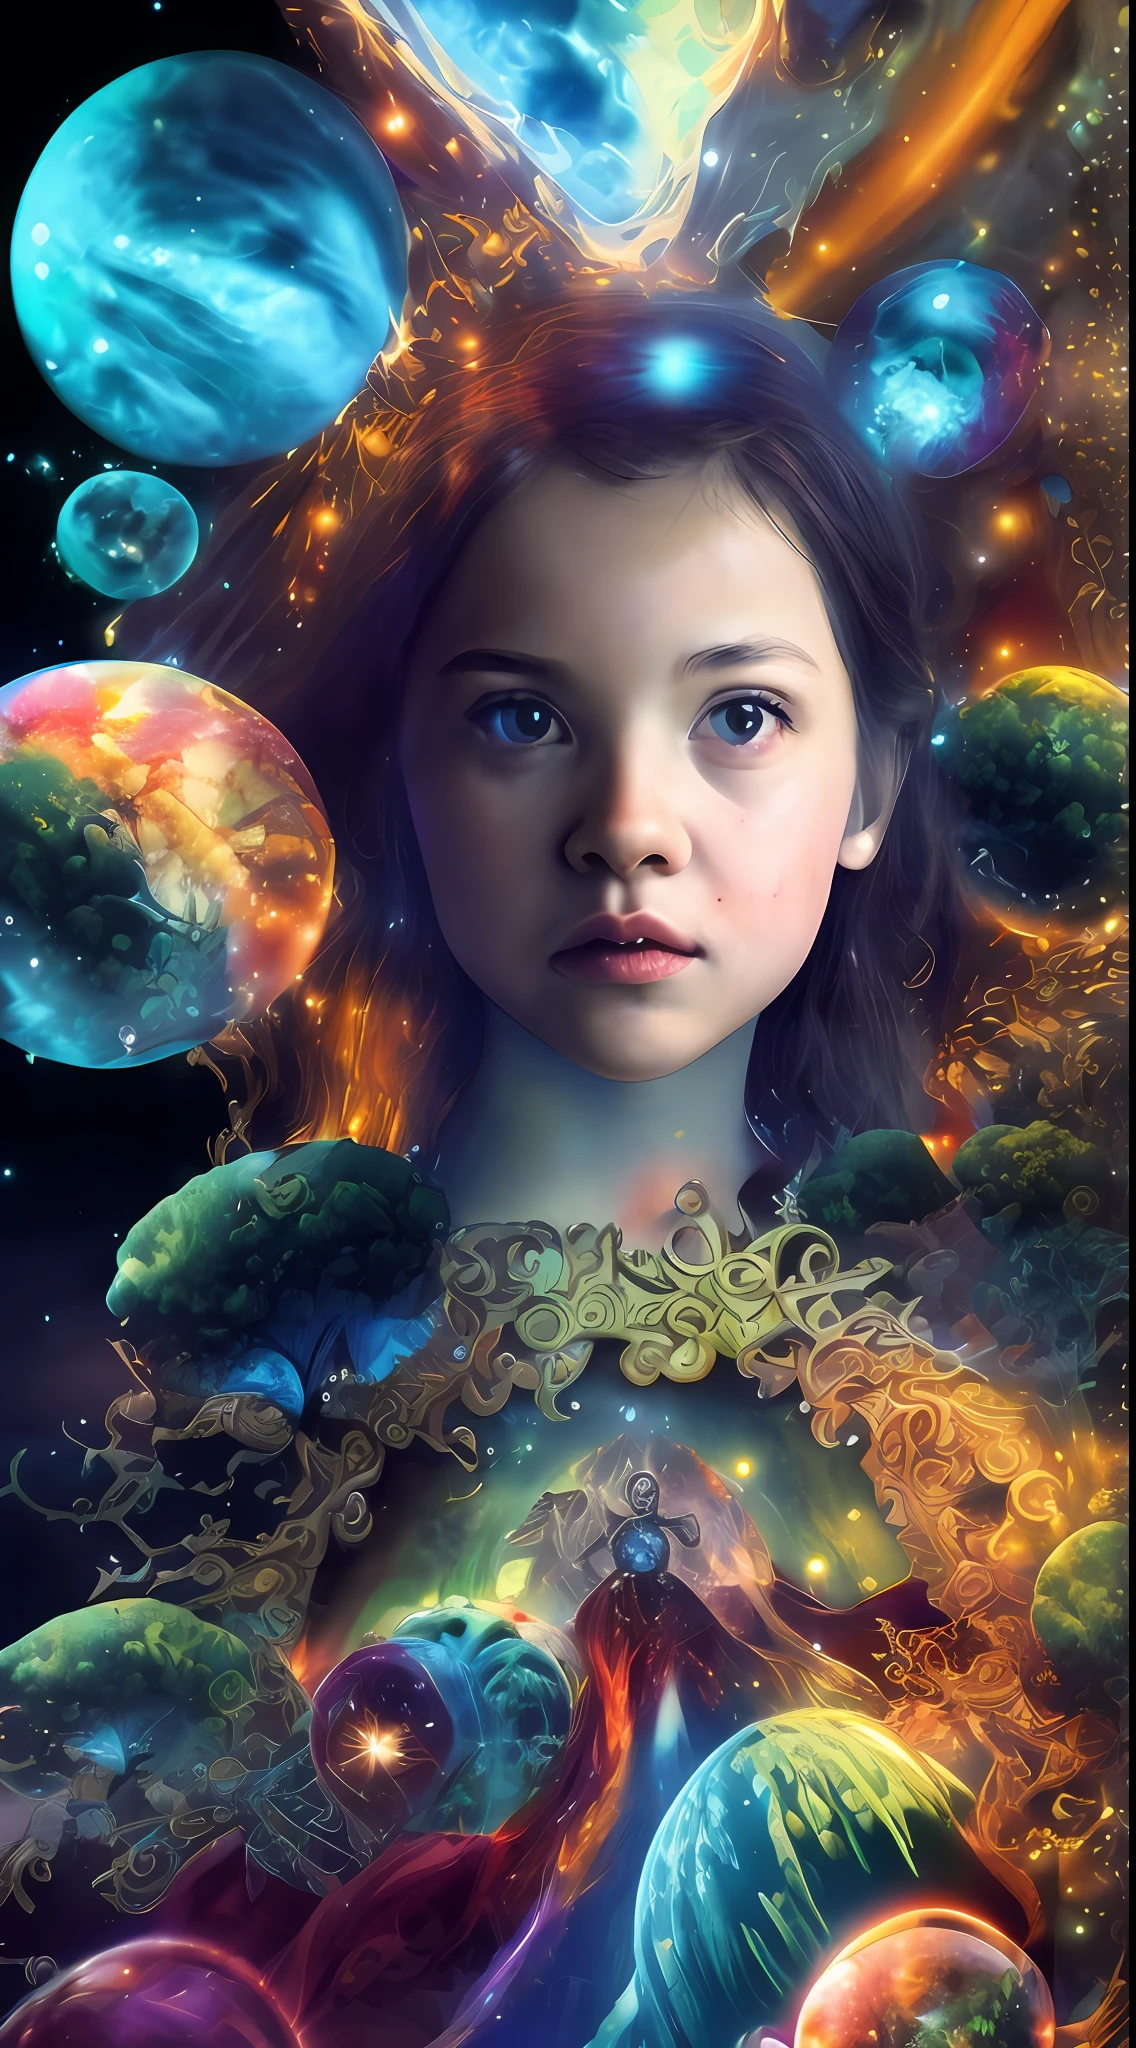 Incredible and spectacular scene, a "((high quality)), (detailed)), ((fantasy)), illustration, perspective (45 degree tilt angle), theme (enchanted forest style), scene elements (handsome boy, beautiful girl), picture quality (3D rendering effect), exquisite details, beautiful lights "emerge from glowing clouds, fractal nebula lines, cosmic entities, celestial bodies, universes, vibrant and vivid, swirling, rotating, impractical, high contrast, co-metabolic, magical, mysterious, mysterious, surreal, Oversaturated, colorful